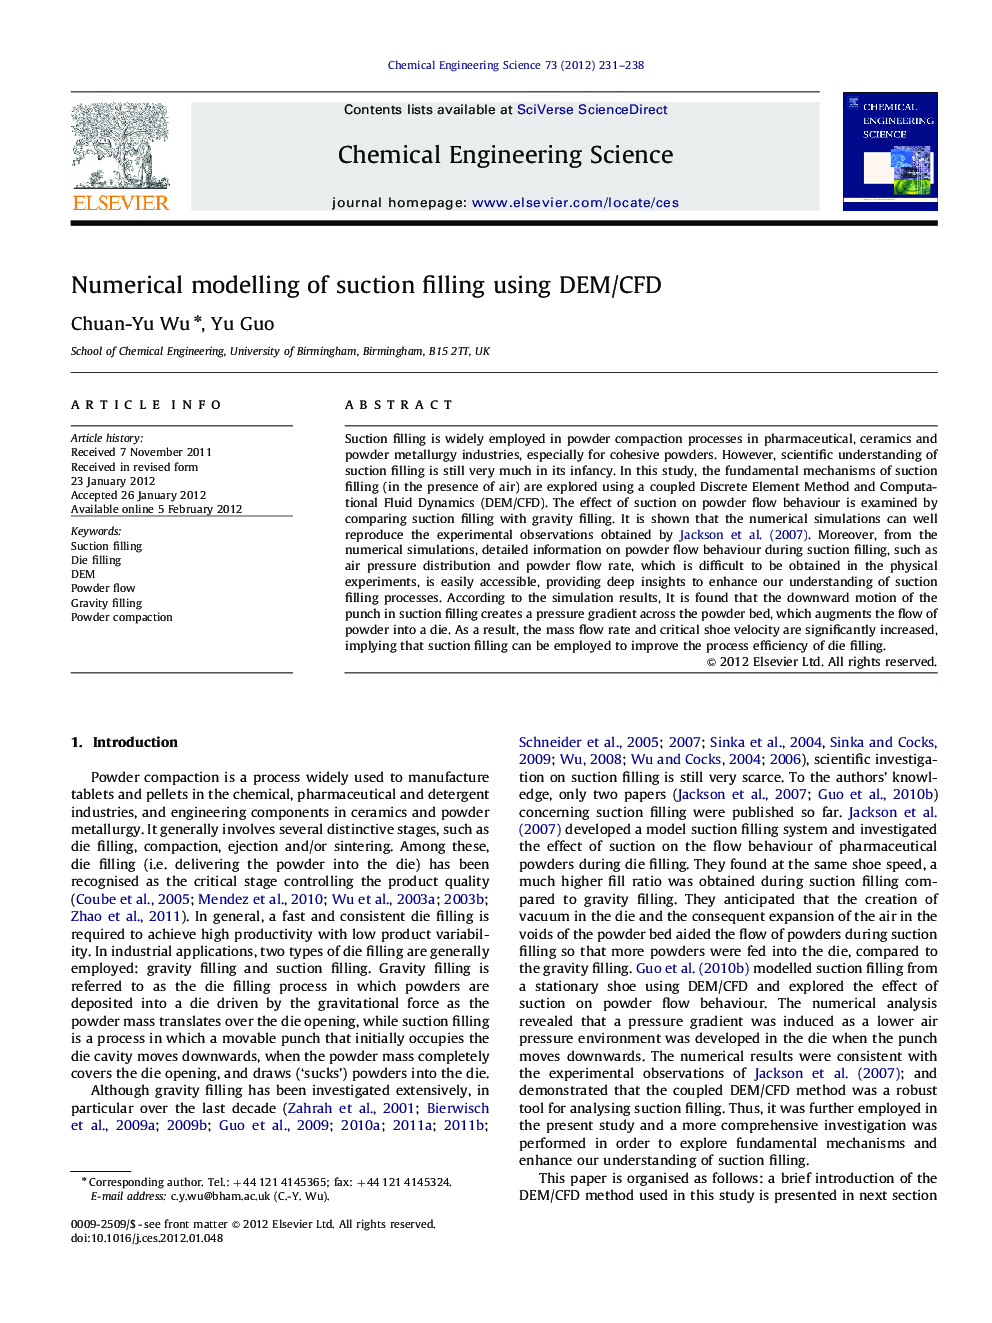 Numerical modelling of suction filling using DEM/CFD